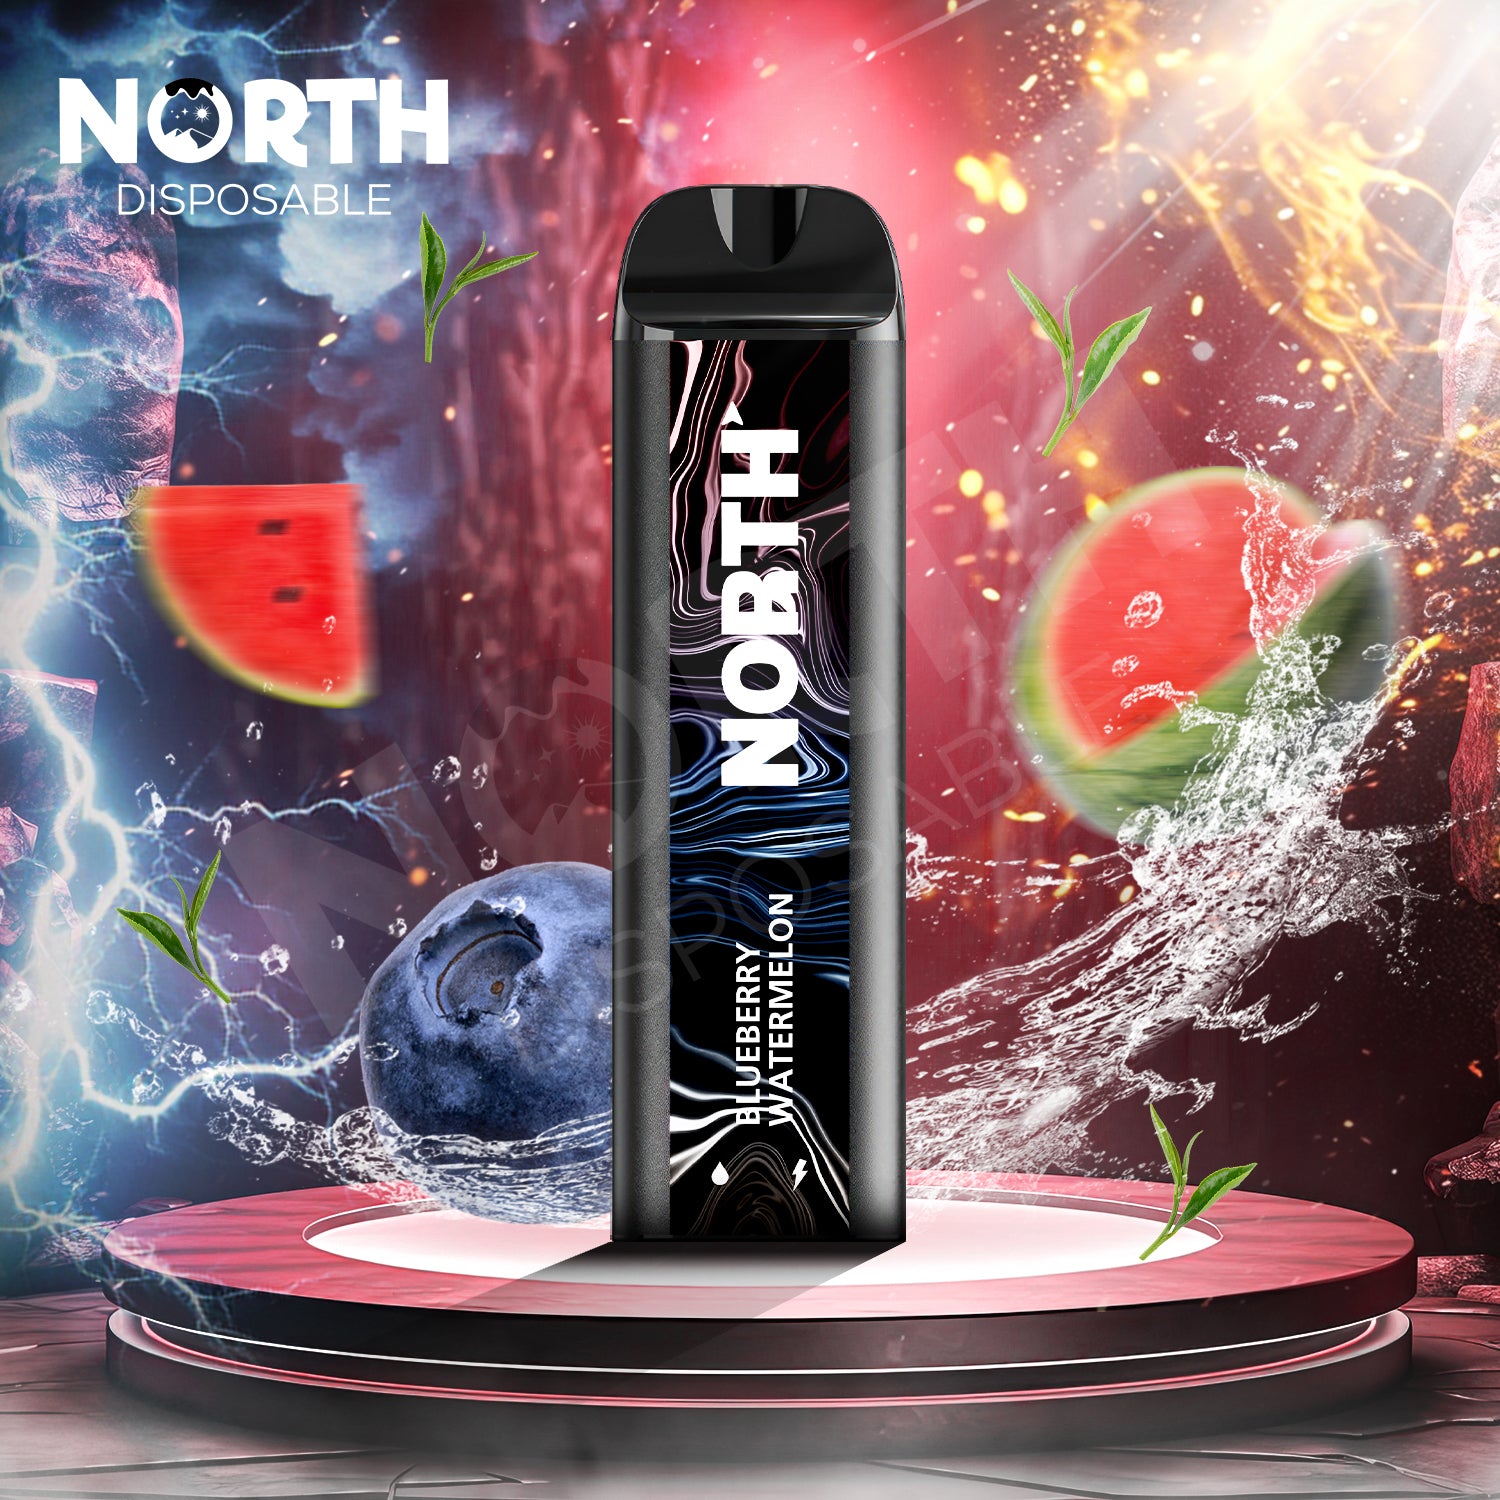 North 5000 Disposable 3% - Blueberry Watermelon